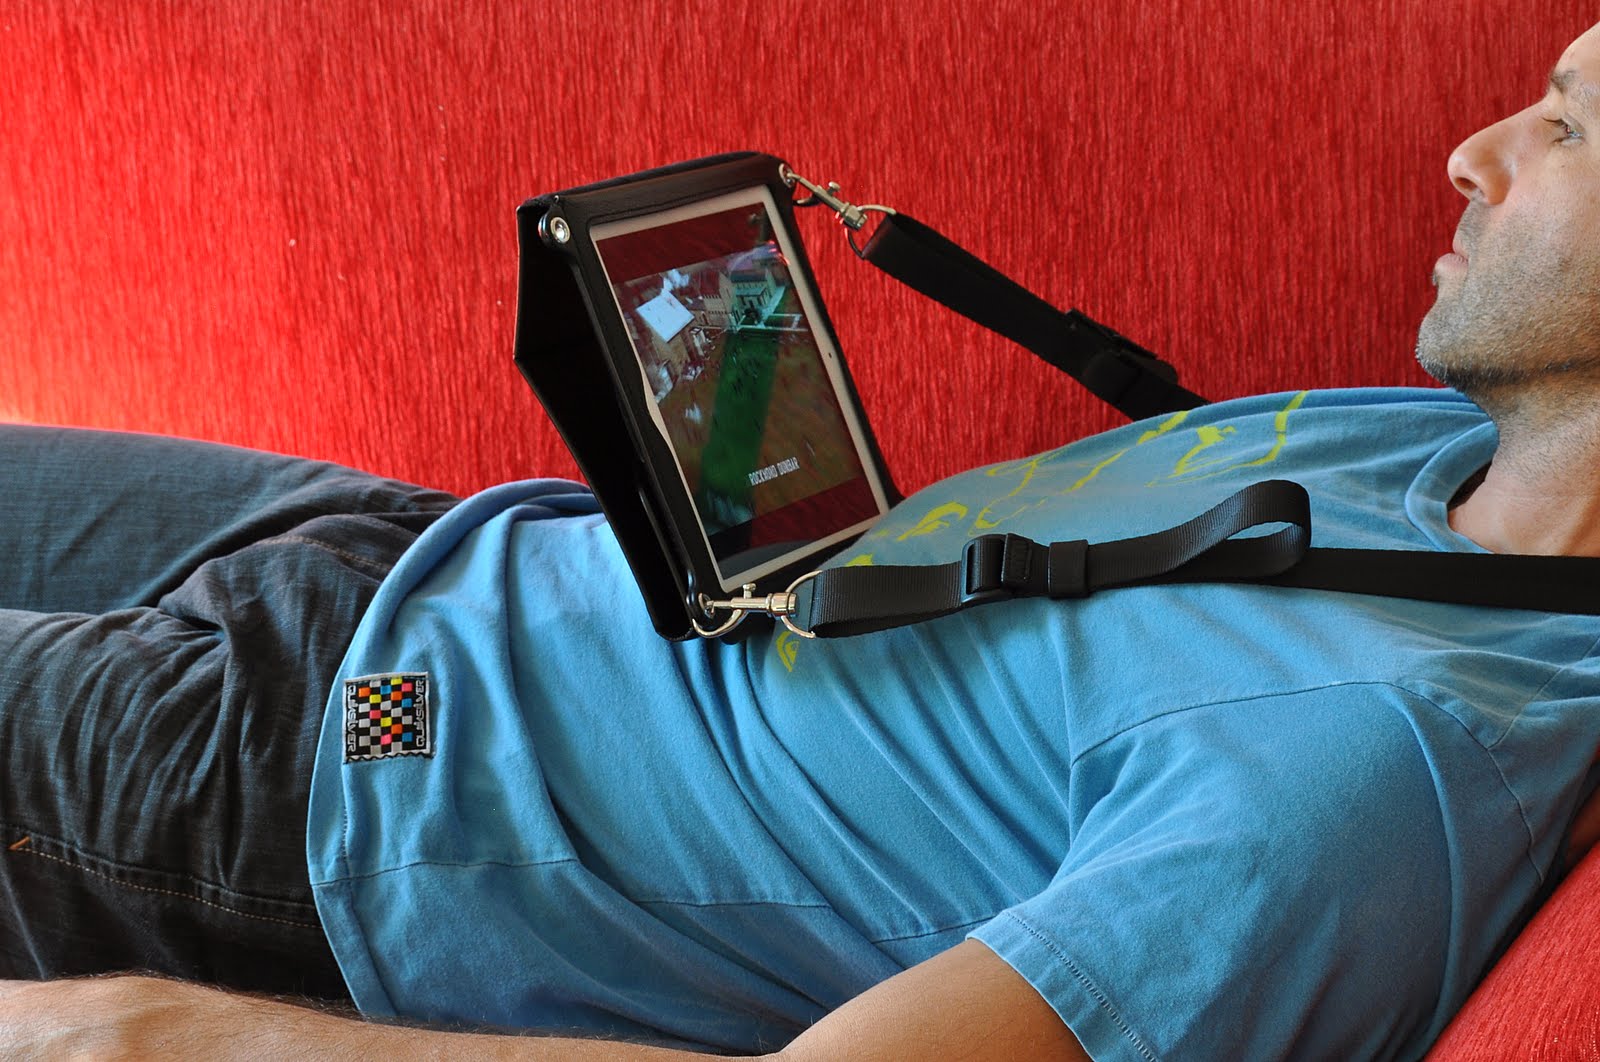 Use hands-free Across case to watch movies